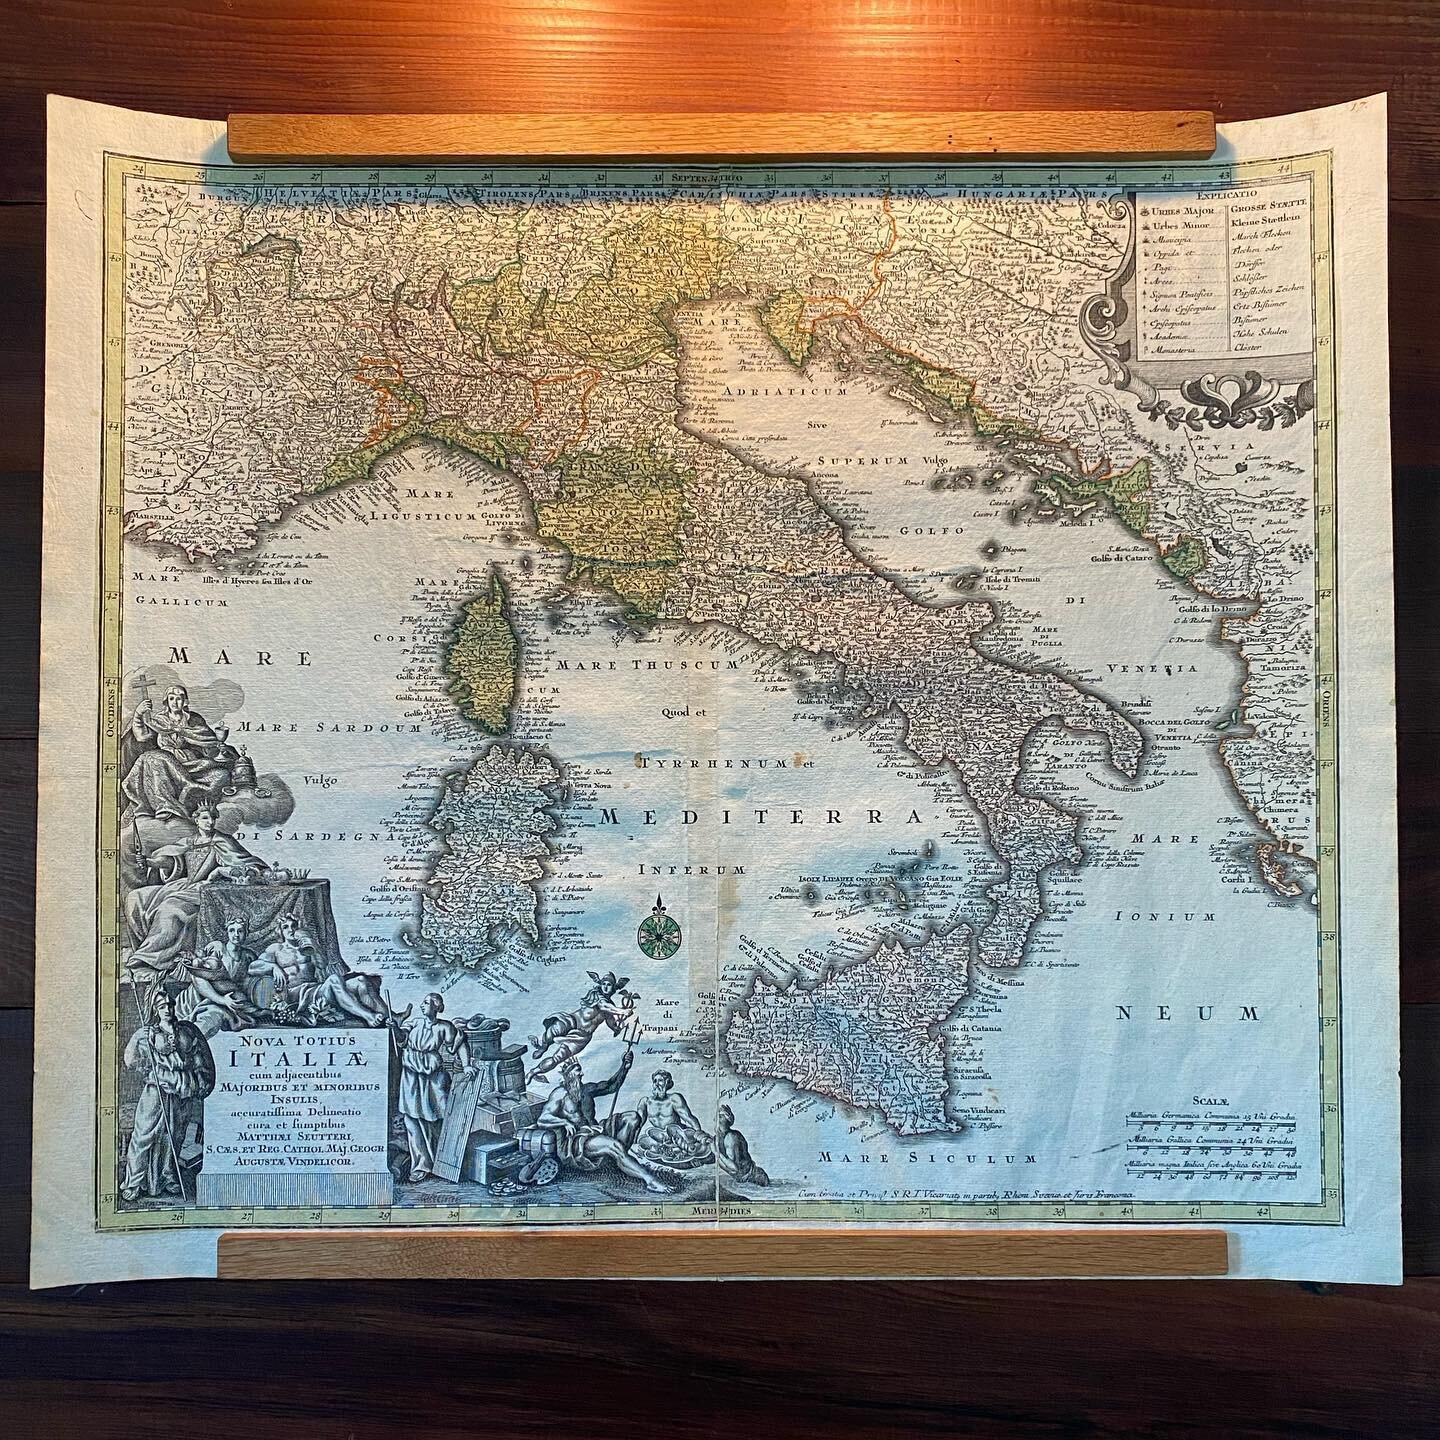 Italy, 1740
Check out this beautiful, decorative&nbsp;map of Italy that also includes the islands of Corsica and Sardina, Sicily and the coastline of Balkans. &nbsp;Made&nbsp;by a prominent German cartographer named&nbsp;Georg Matth&auml;us Seutter a